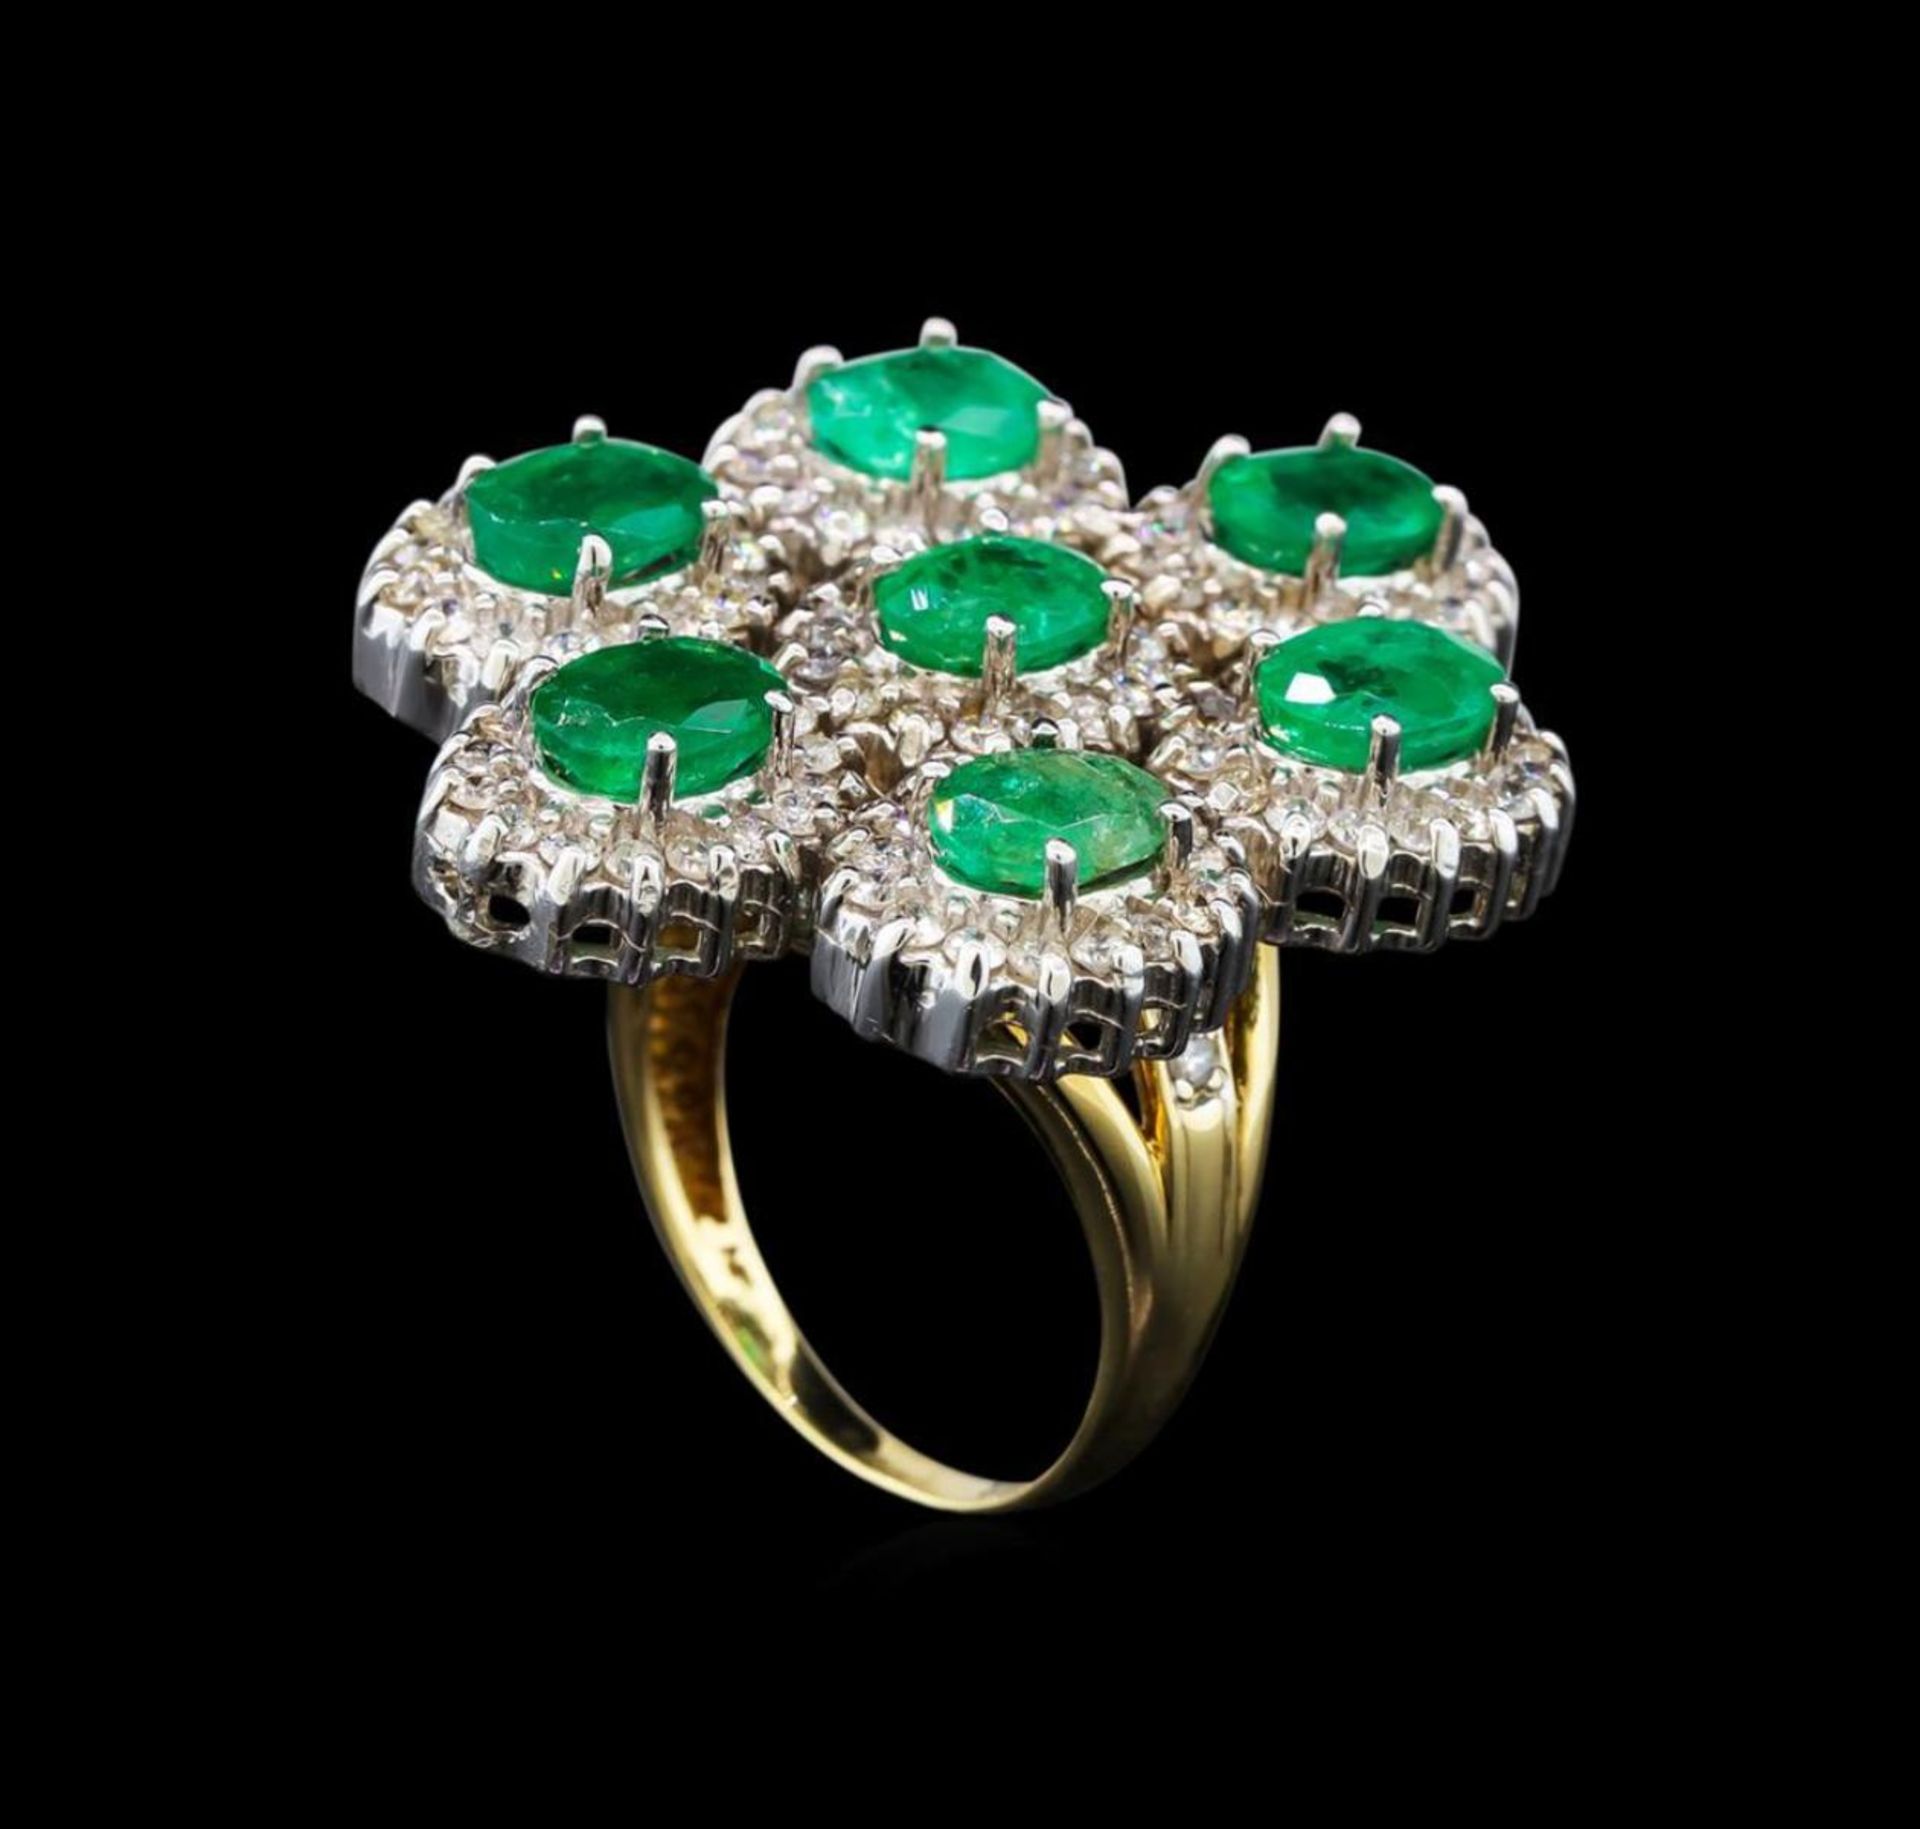 14KT Yellow Gold 4.90 ctw Emerald and Diamond Ring - Image 4 of 5